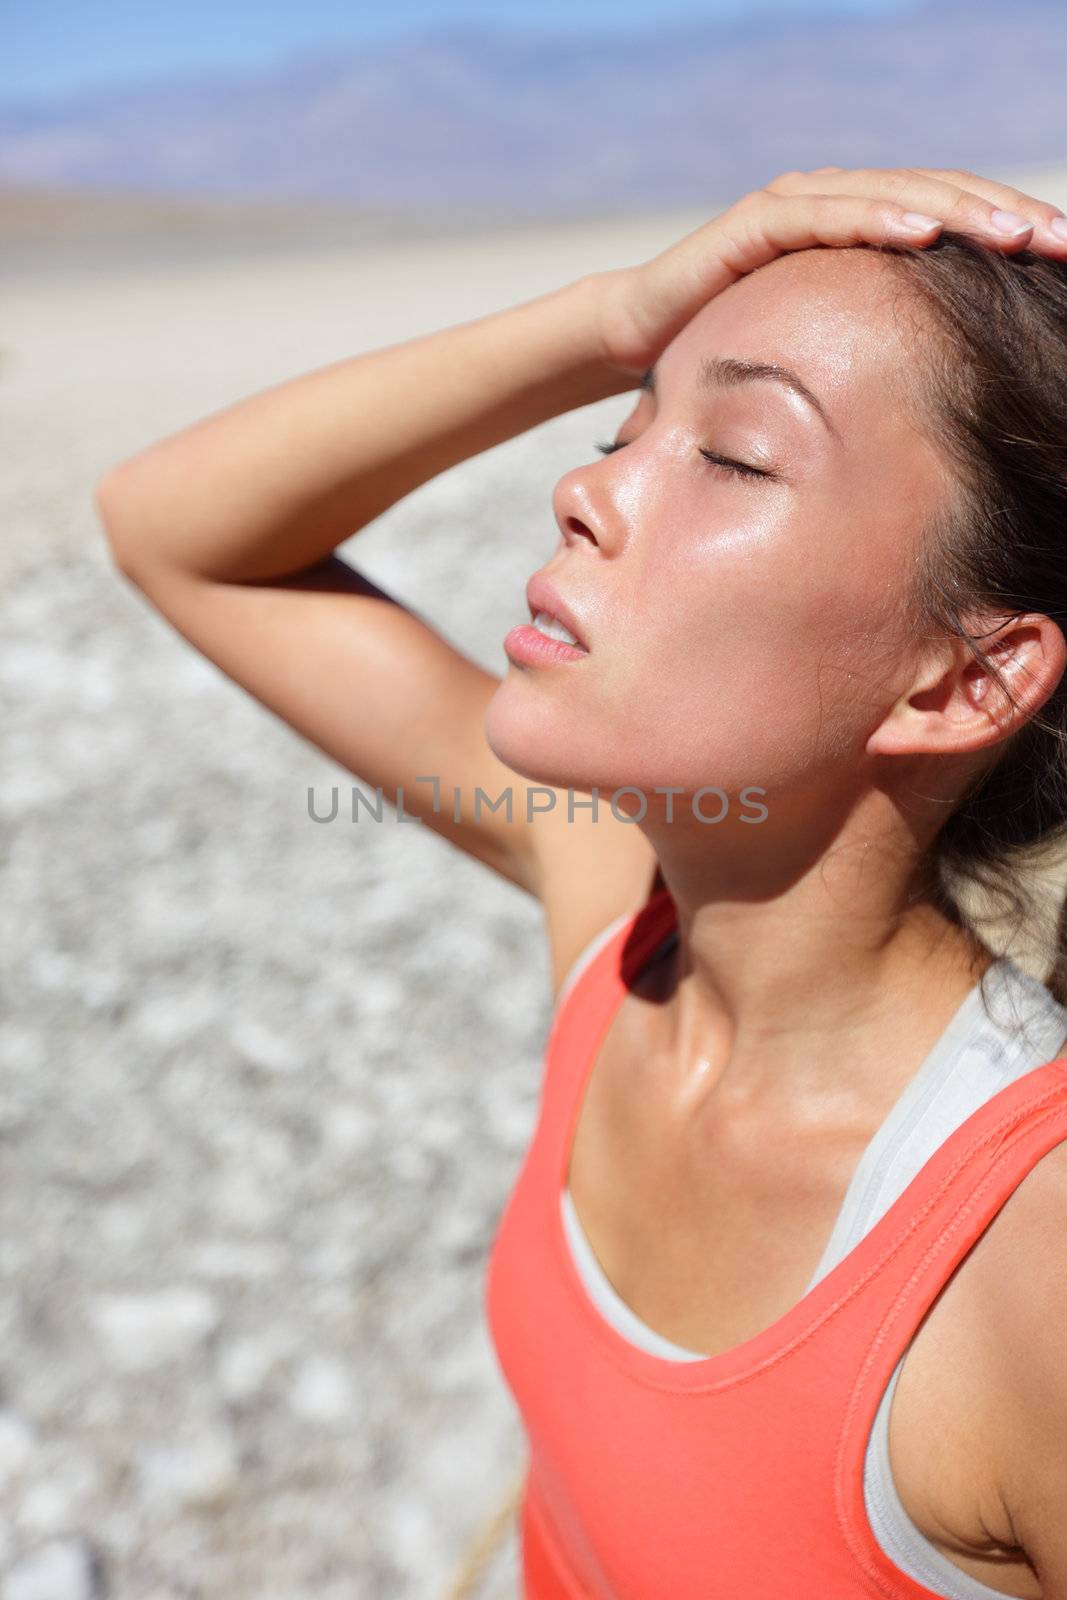 Dehydration thirst concept woman in Death Valley desert. Girl tired and dehydrated close to heat stroke due to high temperature and lack of water.